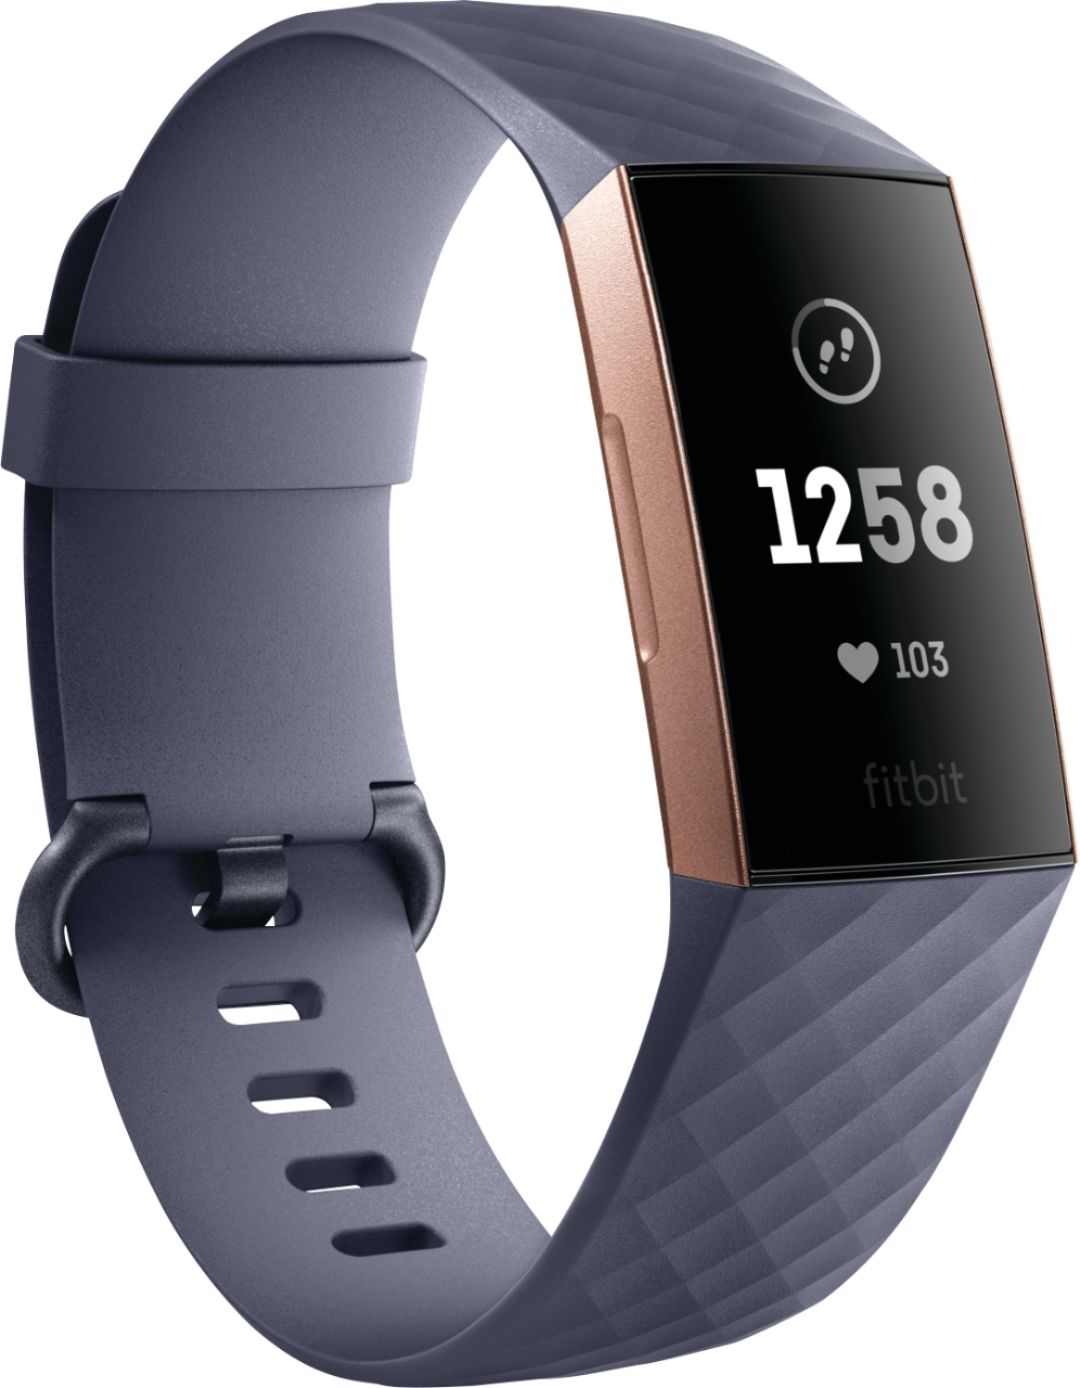 New Fitbit Charge 3 Advanced Activity Tracker Blue Gray/Rose Gold SHIPS FAST! 